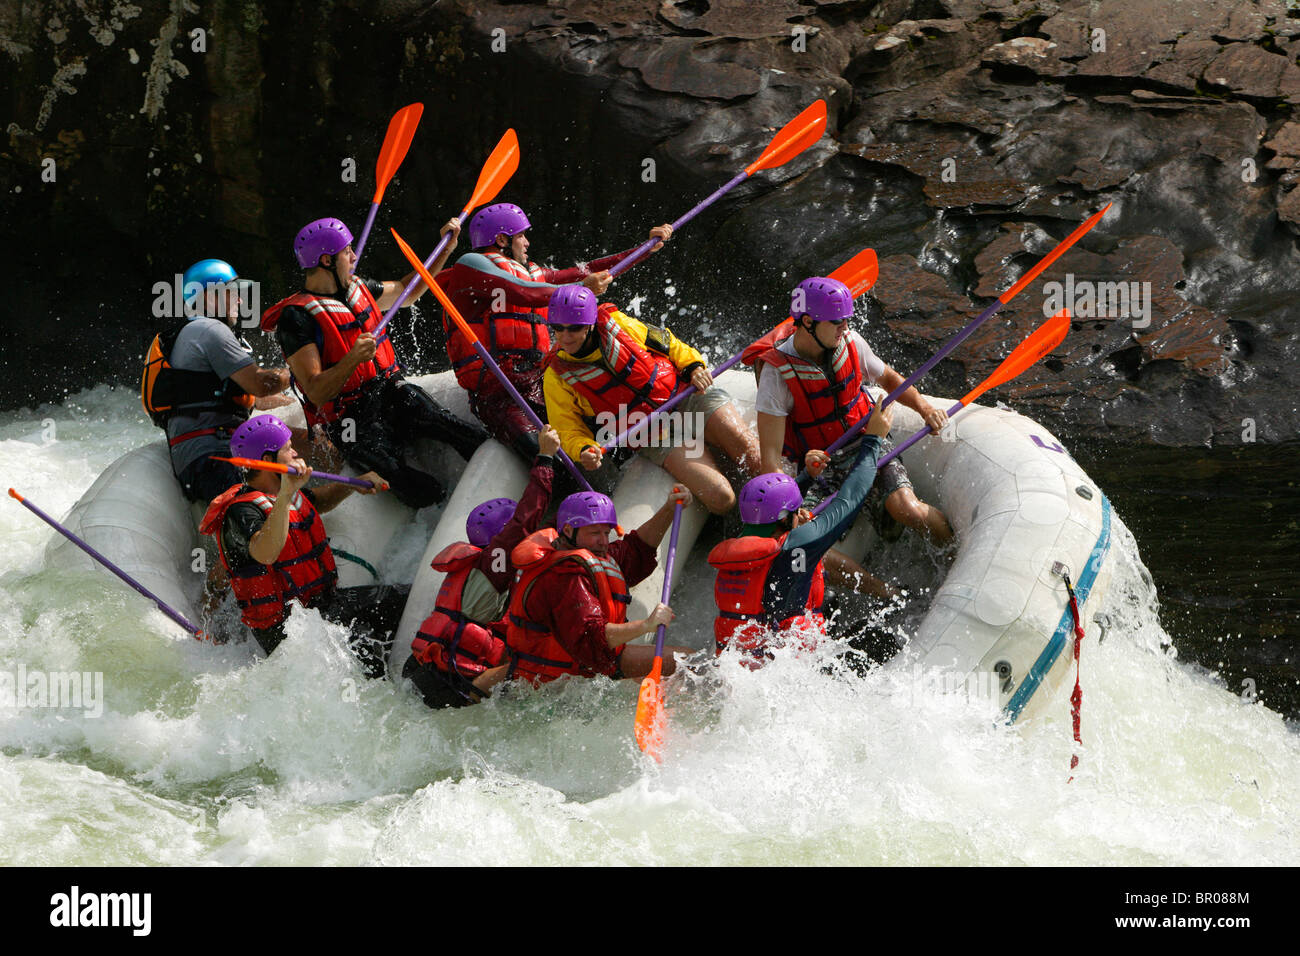 Whitewater rafters ride up onto the side of rocks. Stock Photo